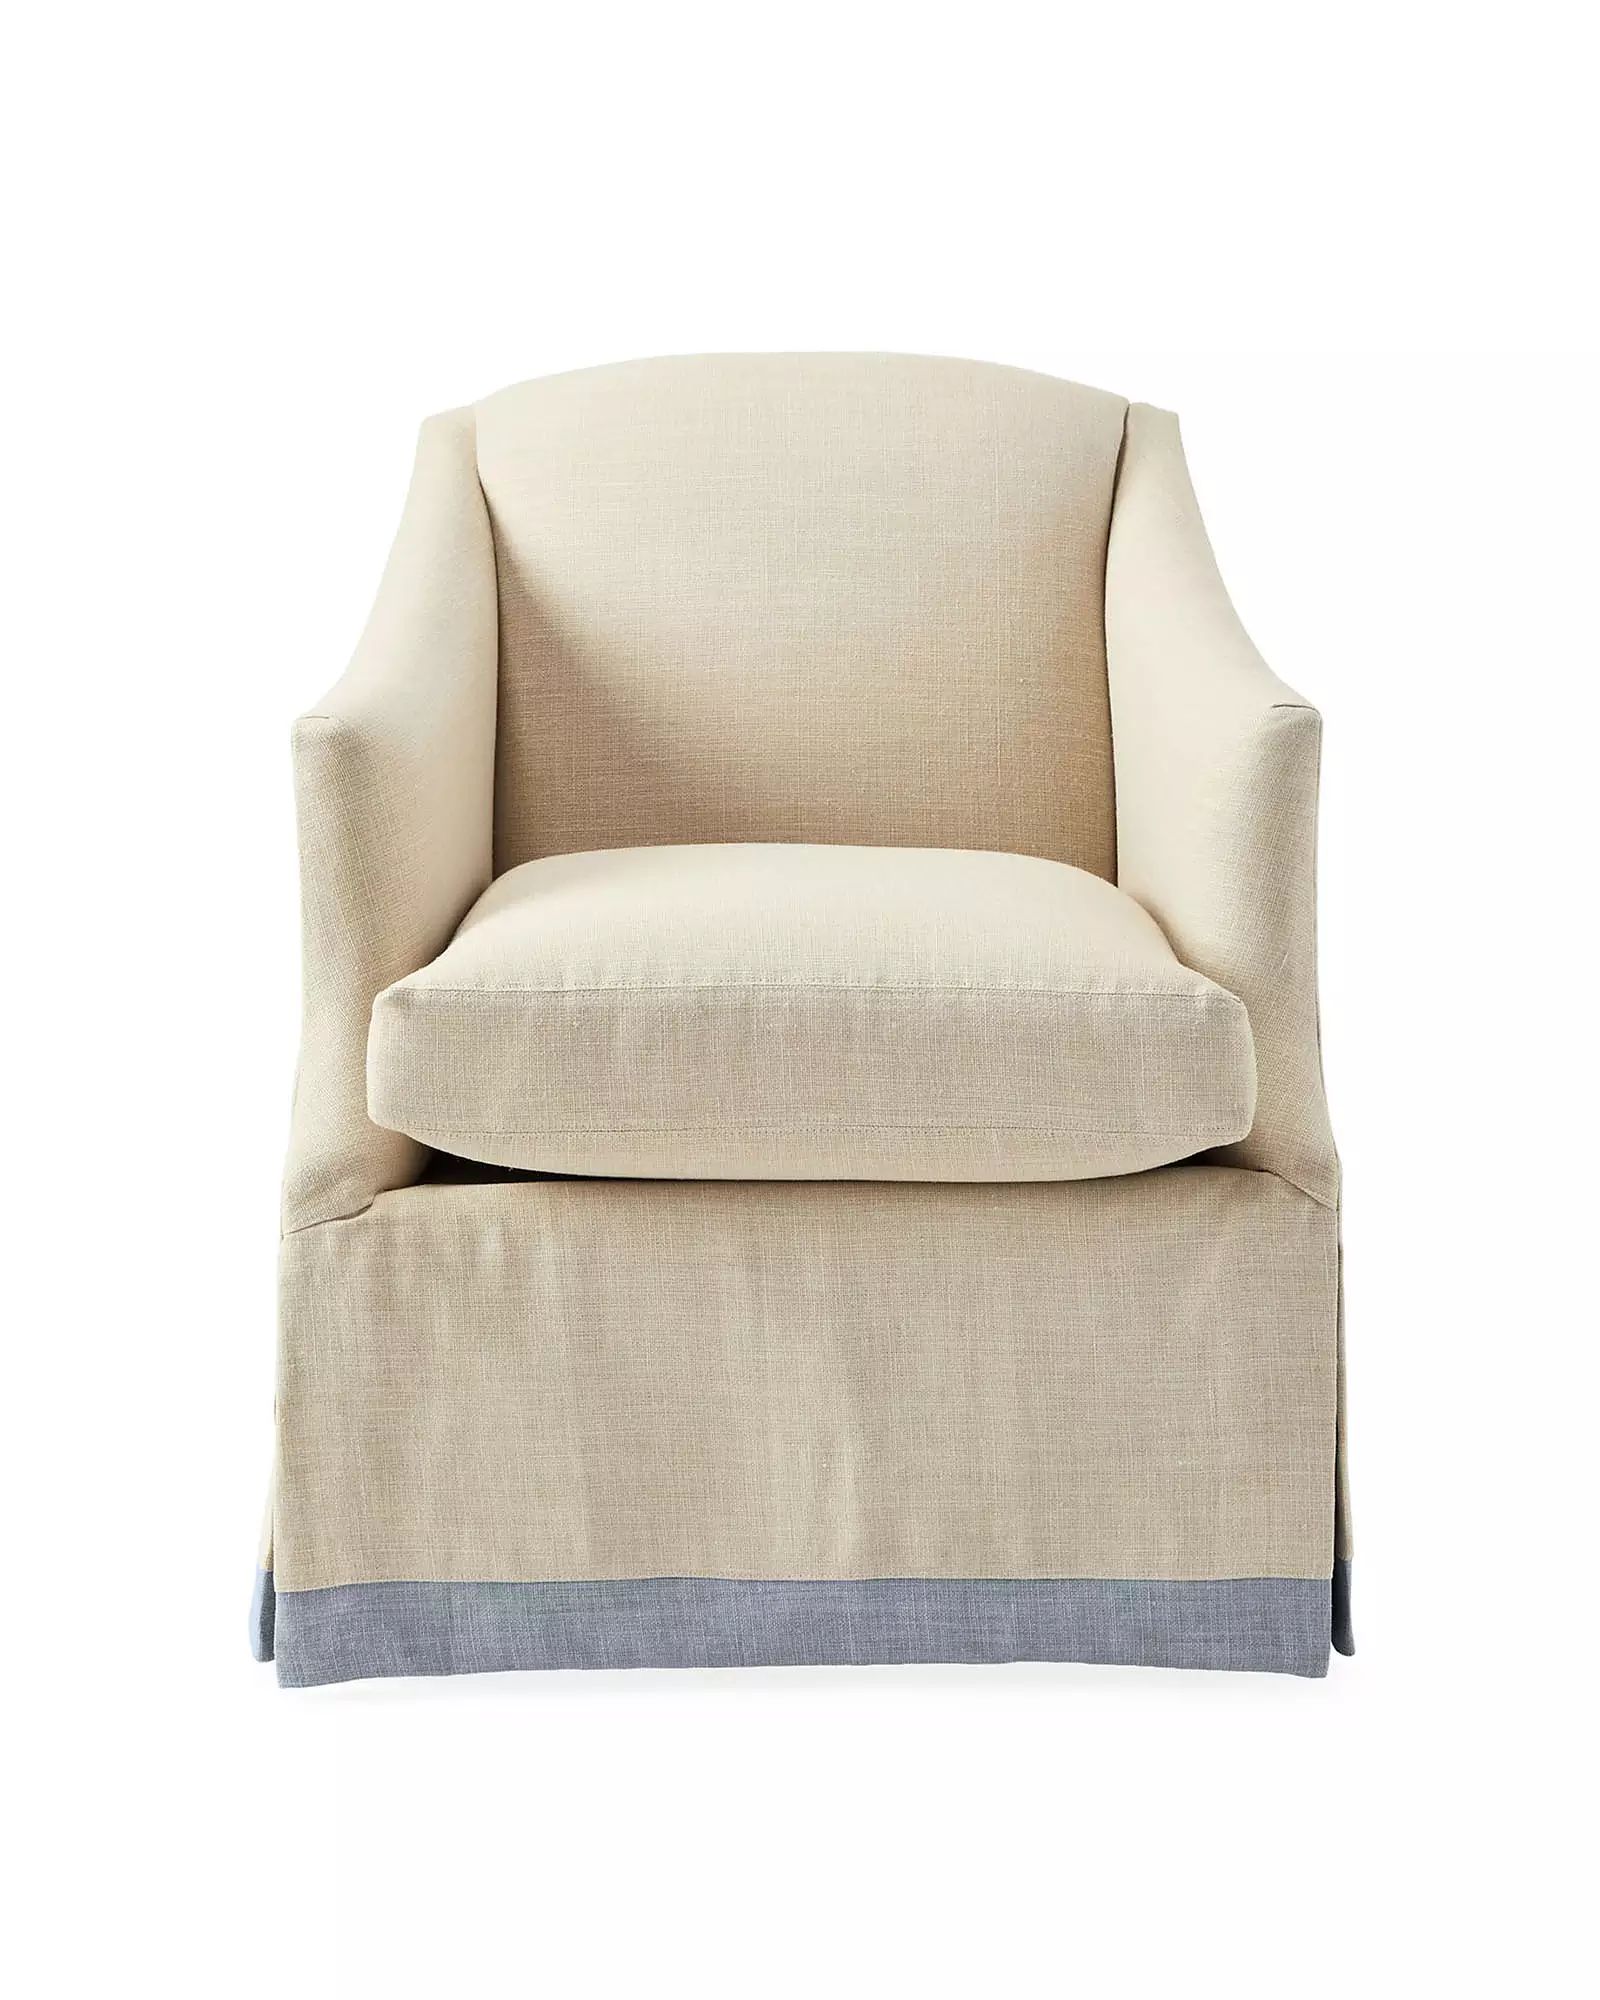 Hinsdale Swivel Chair in Washed Linen Chalk with Washed Linen Coastal Blue Border | Serena and Lily